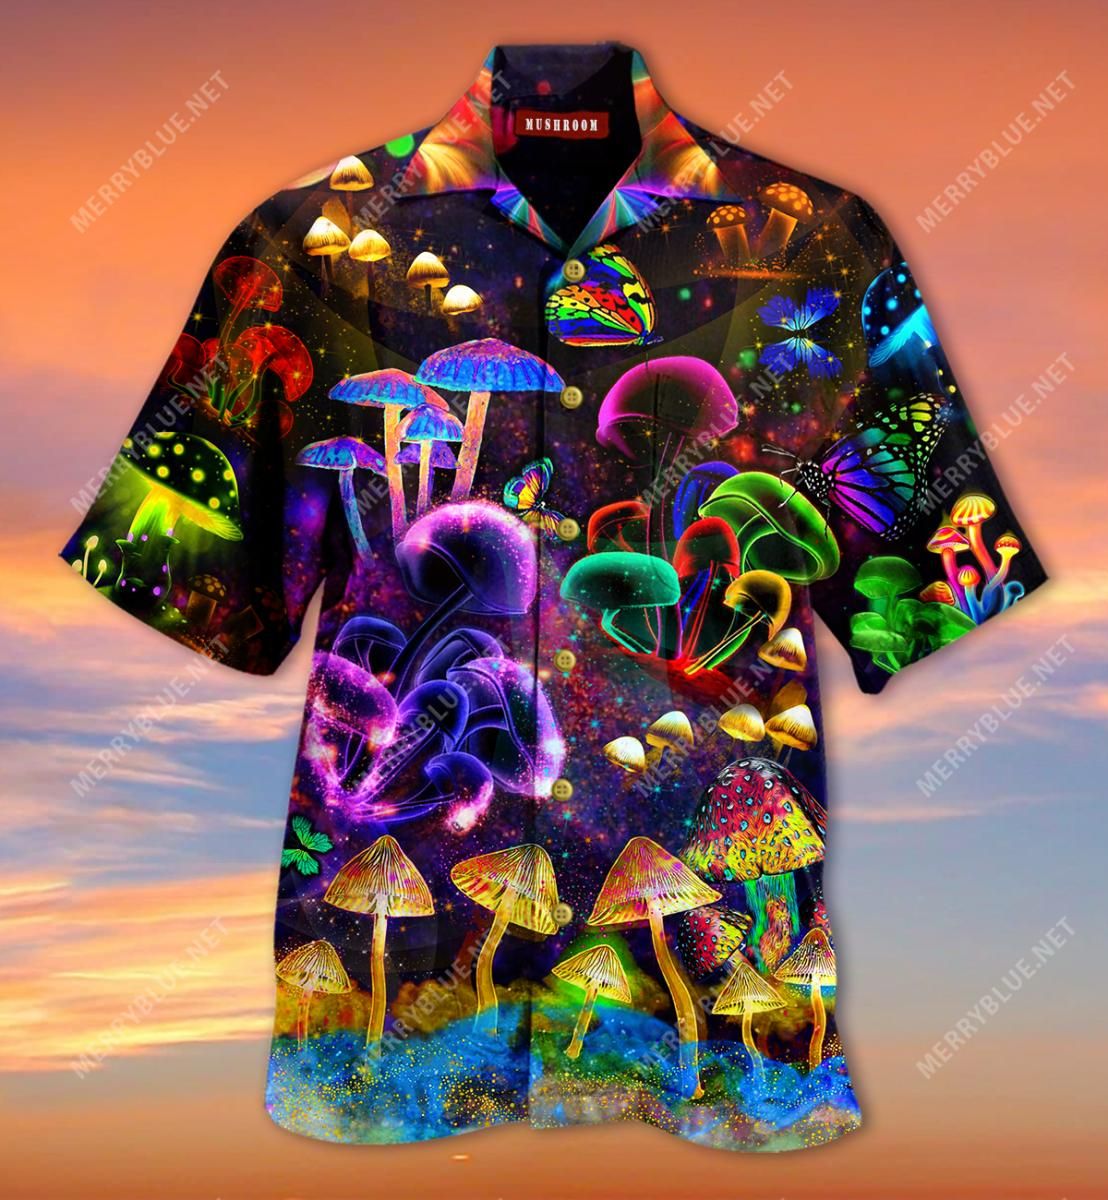 All Mushrooms Are Edible Some Only Once Aloha Hawaiian Shirt Colorful Short Sleeve Summer Beach Casual Shirt For Men And Women